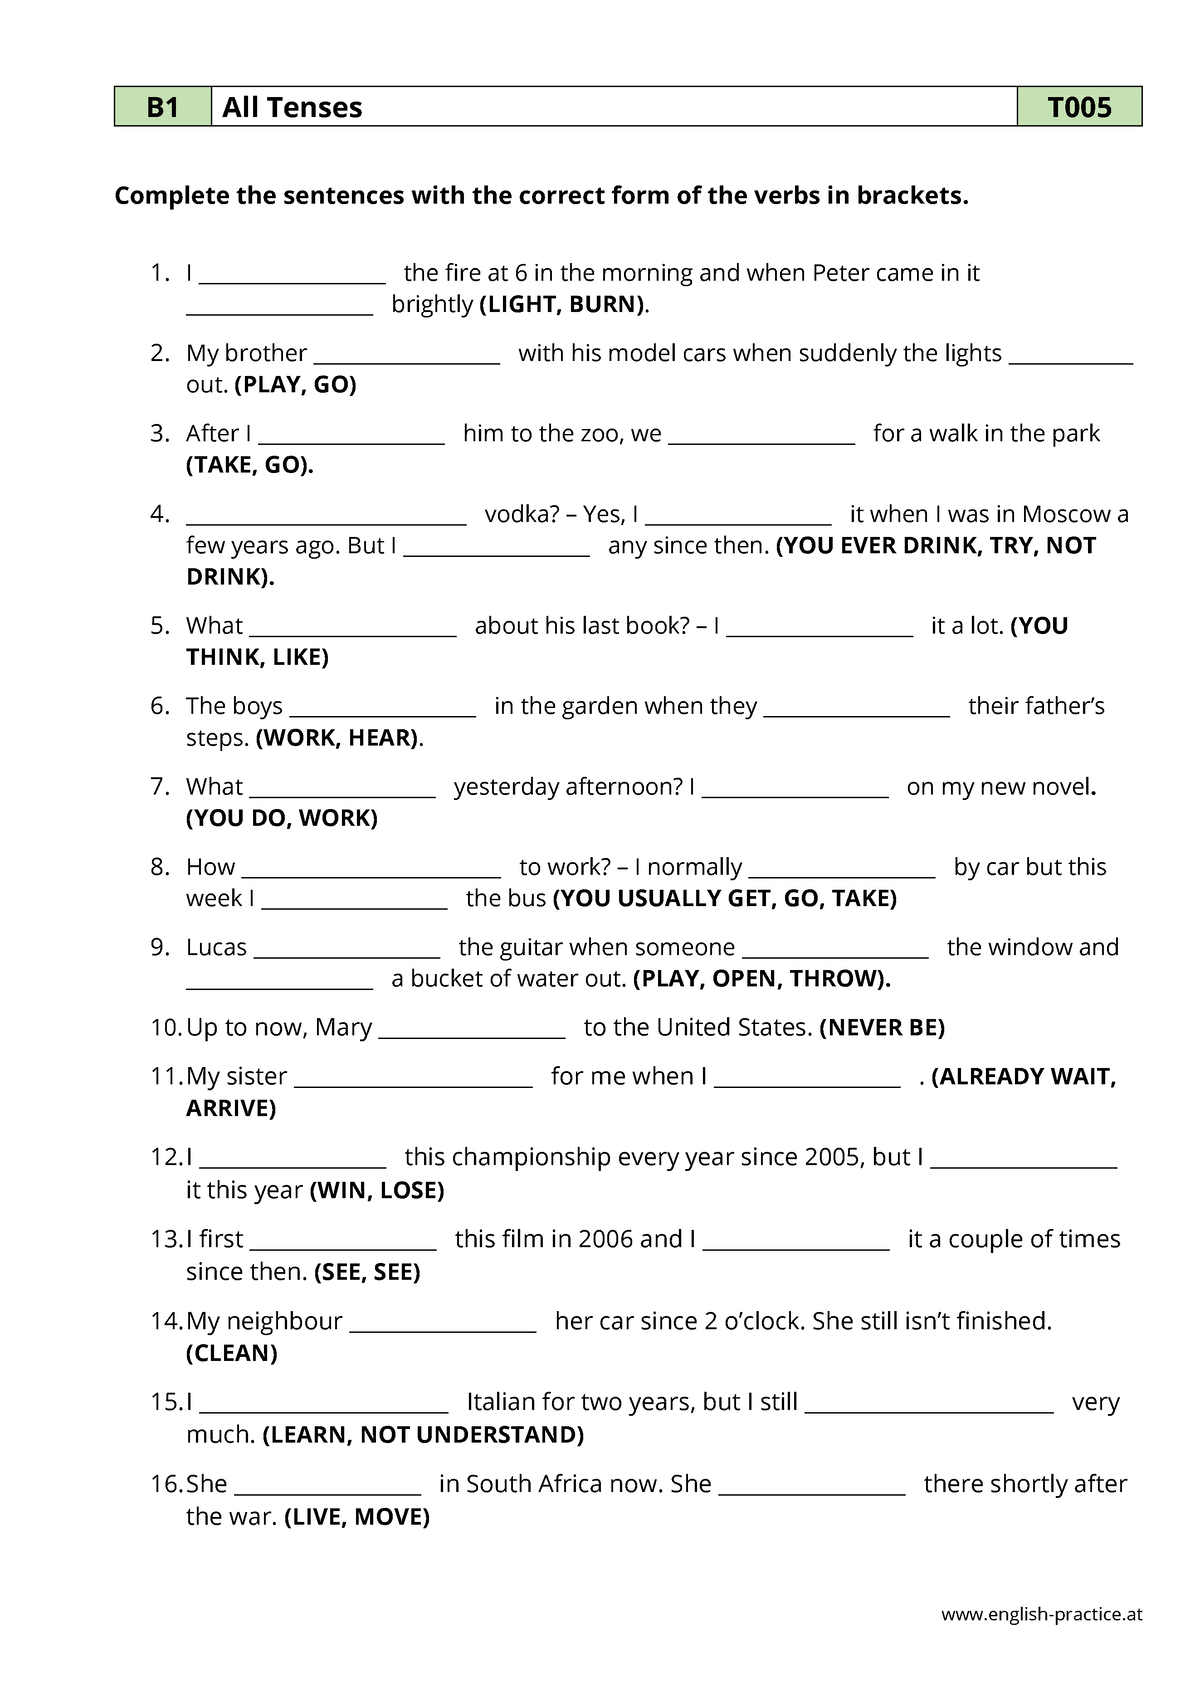 tenses-worksheet-1-notes-english-practice-b1-all-tenses-t-complete